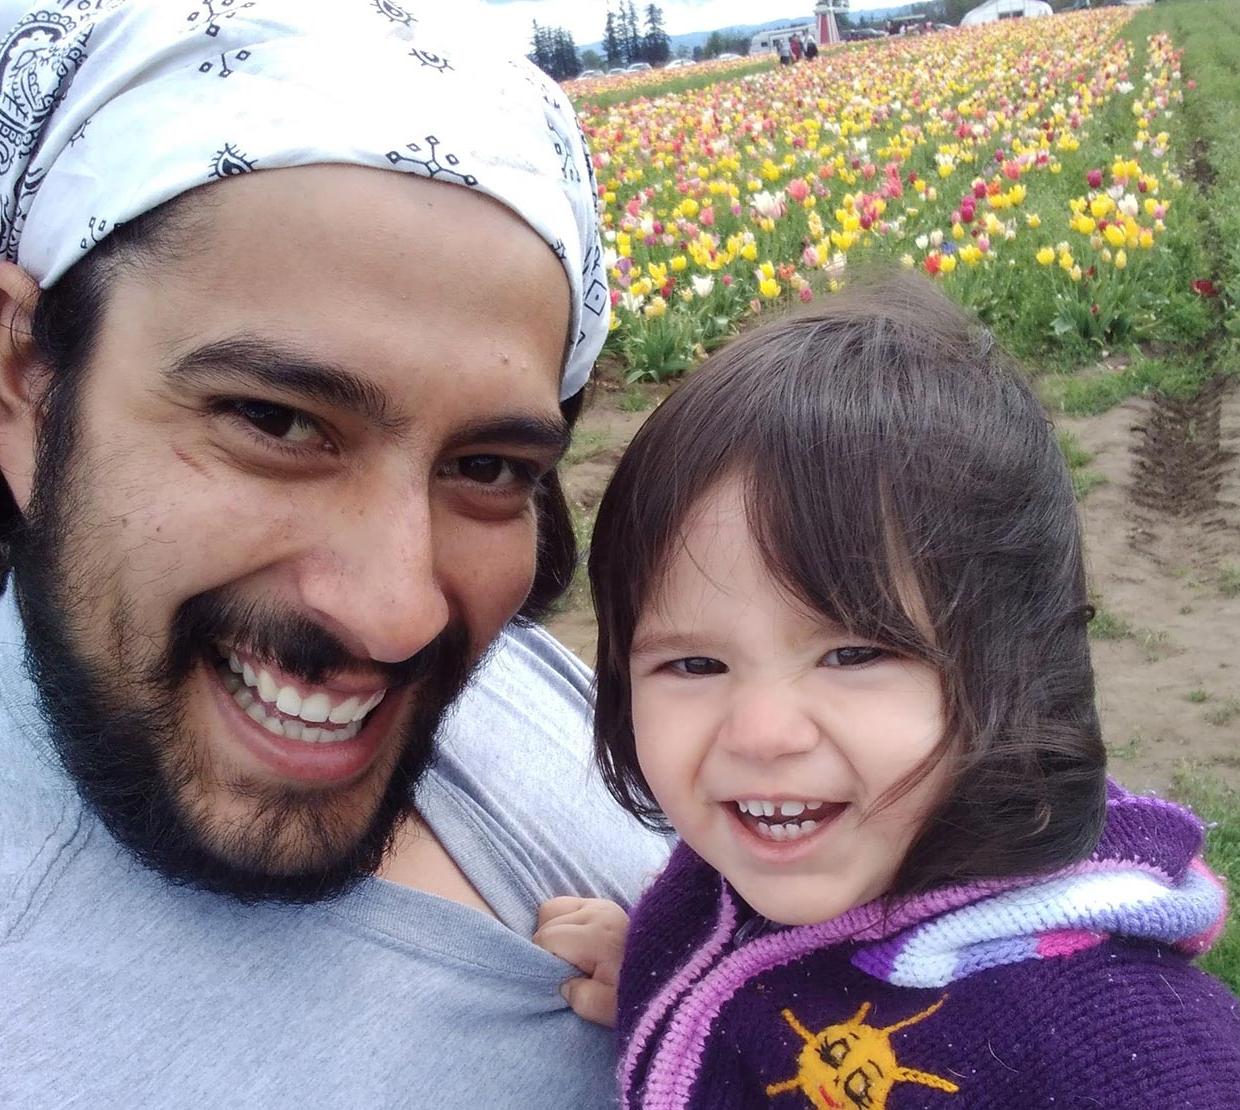 Oregon State physics graduate with daughter amid tulips.